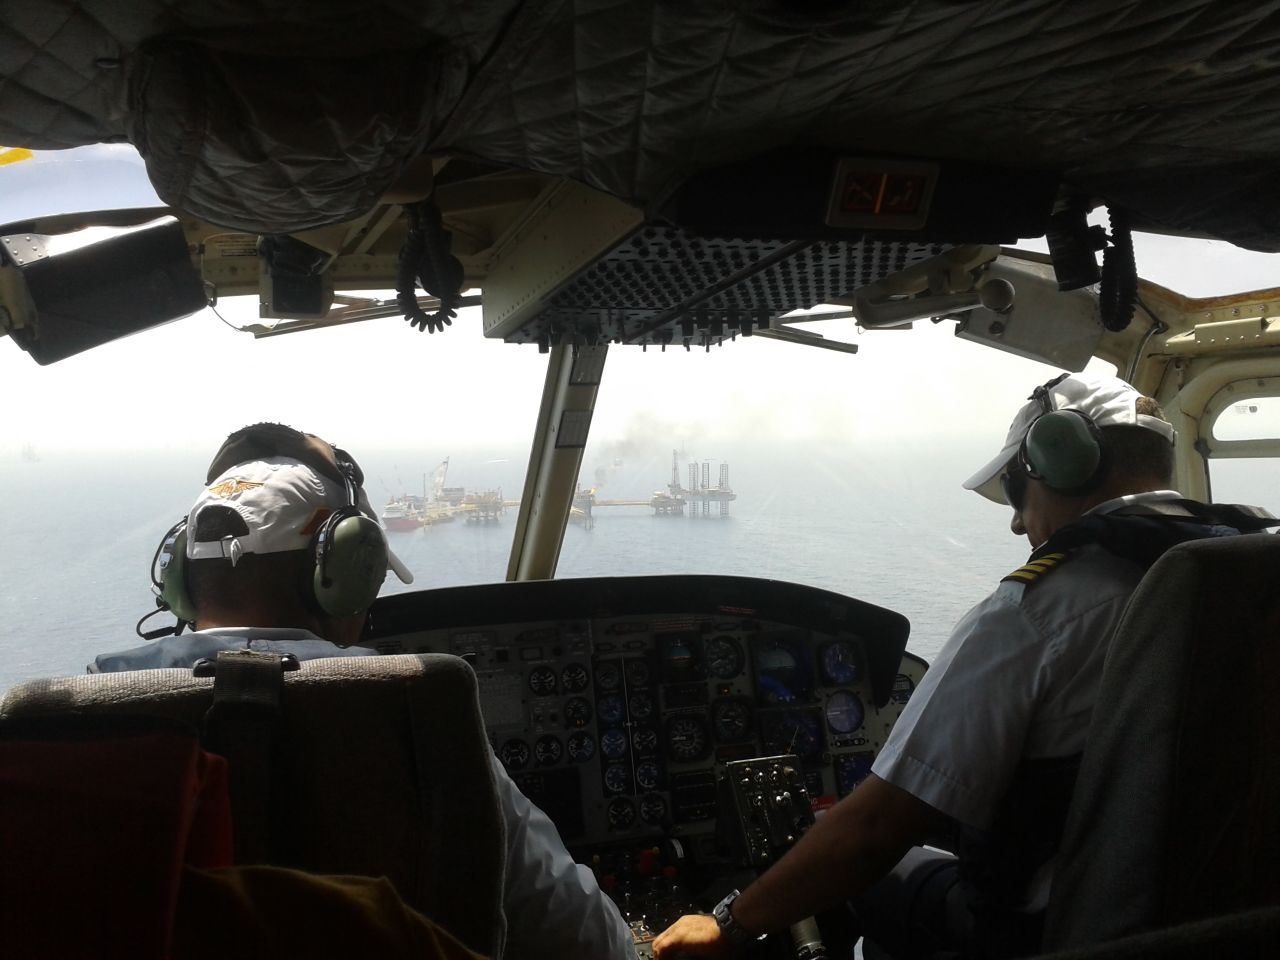 The exploration platform is a 20-minute helicopter ride over the Gulf of Mexico.